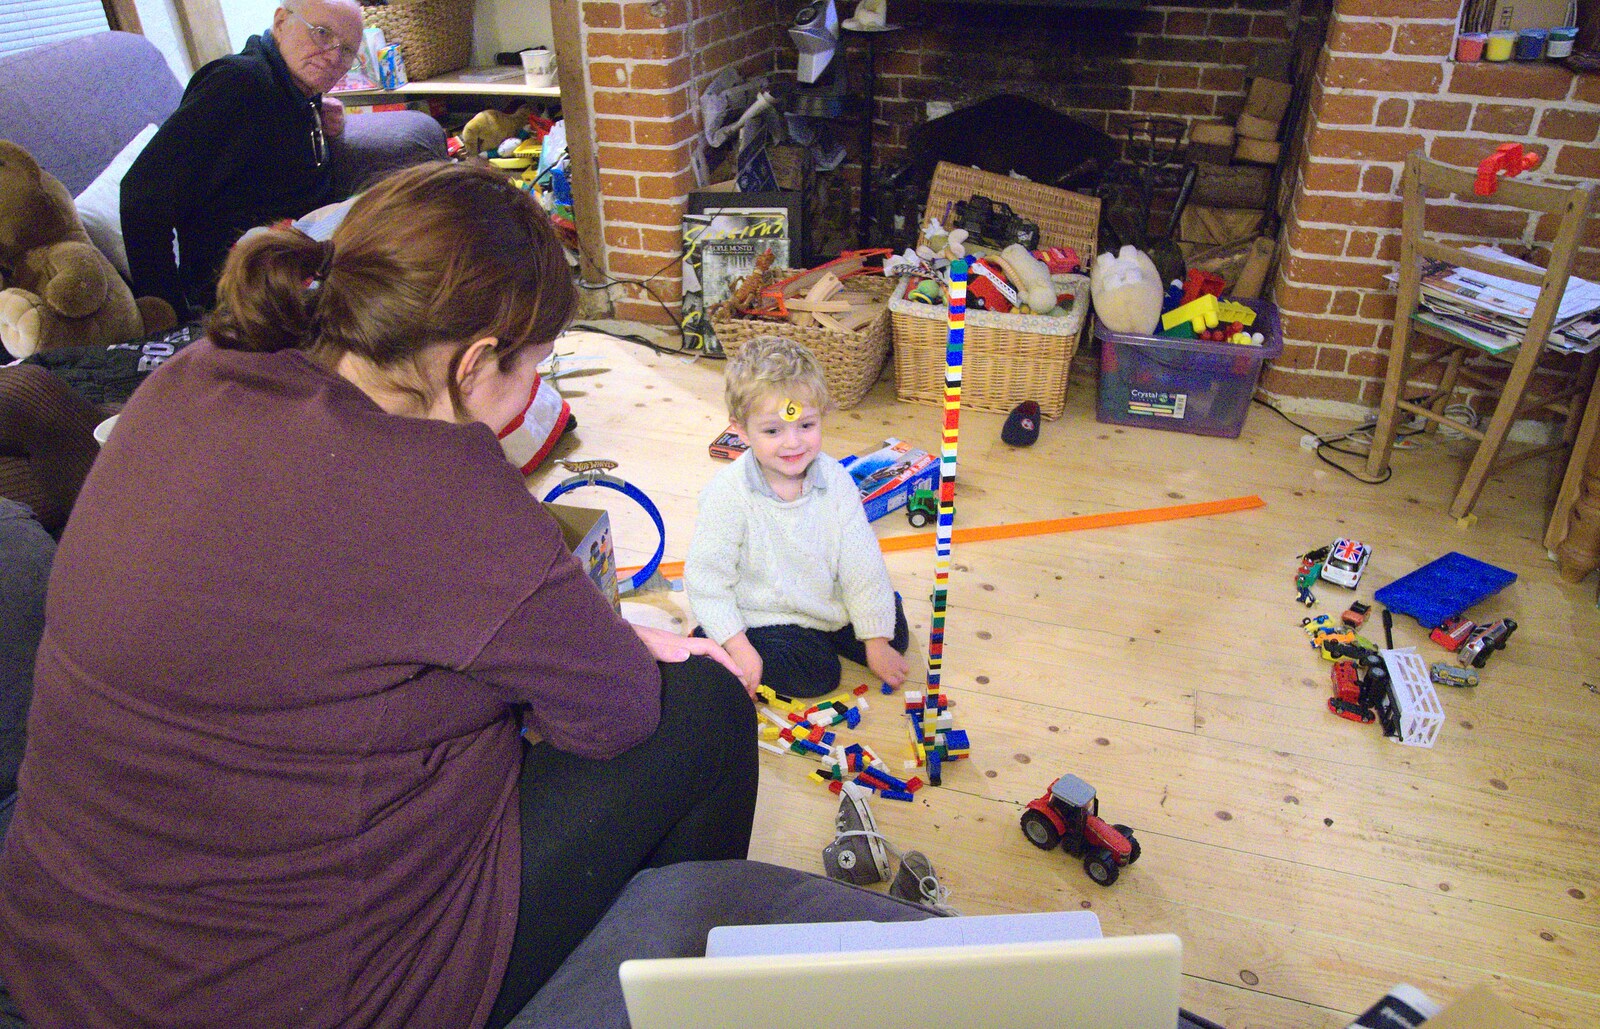 Fred builds a tower out of his new Lego from Christmas Day in the Swan Inn, Brome, Suffolk - 25th December 2011